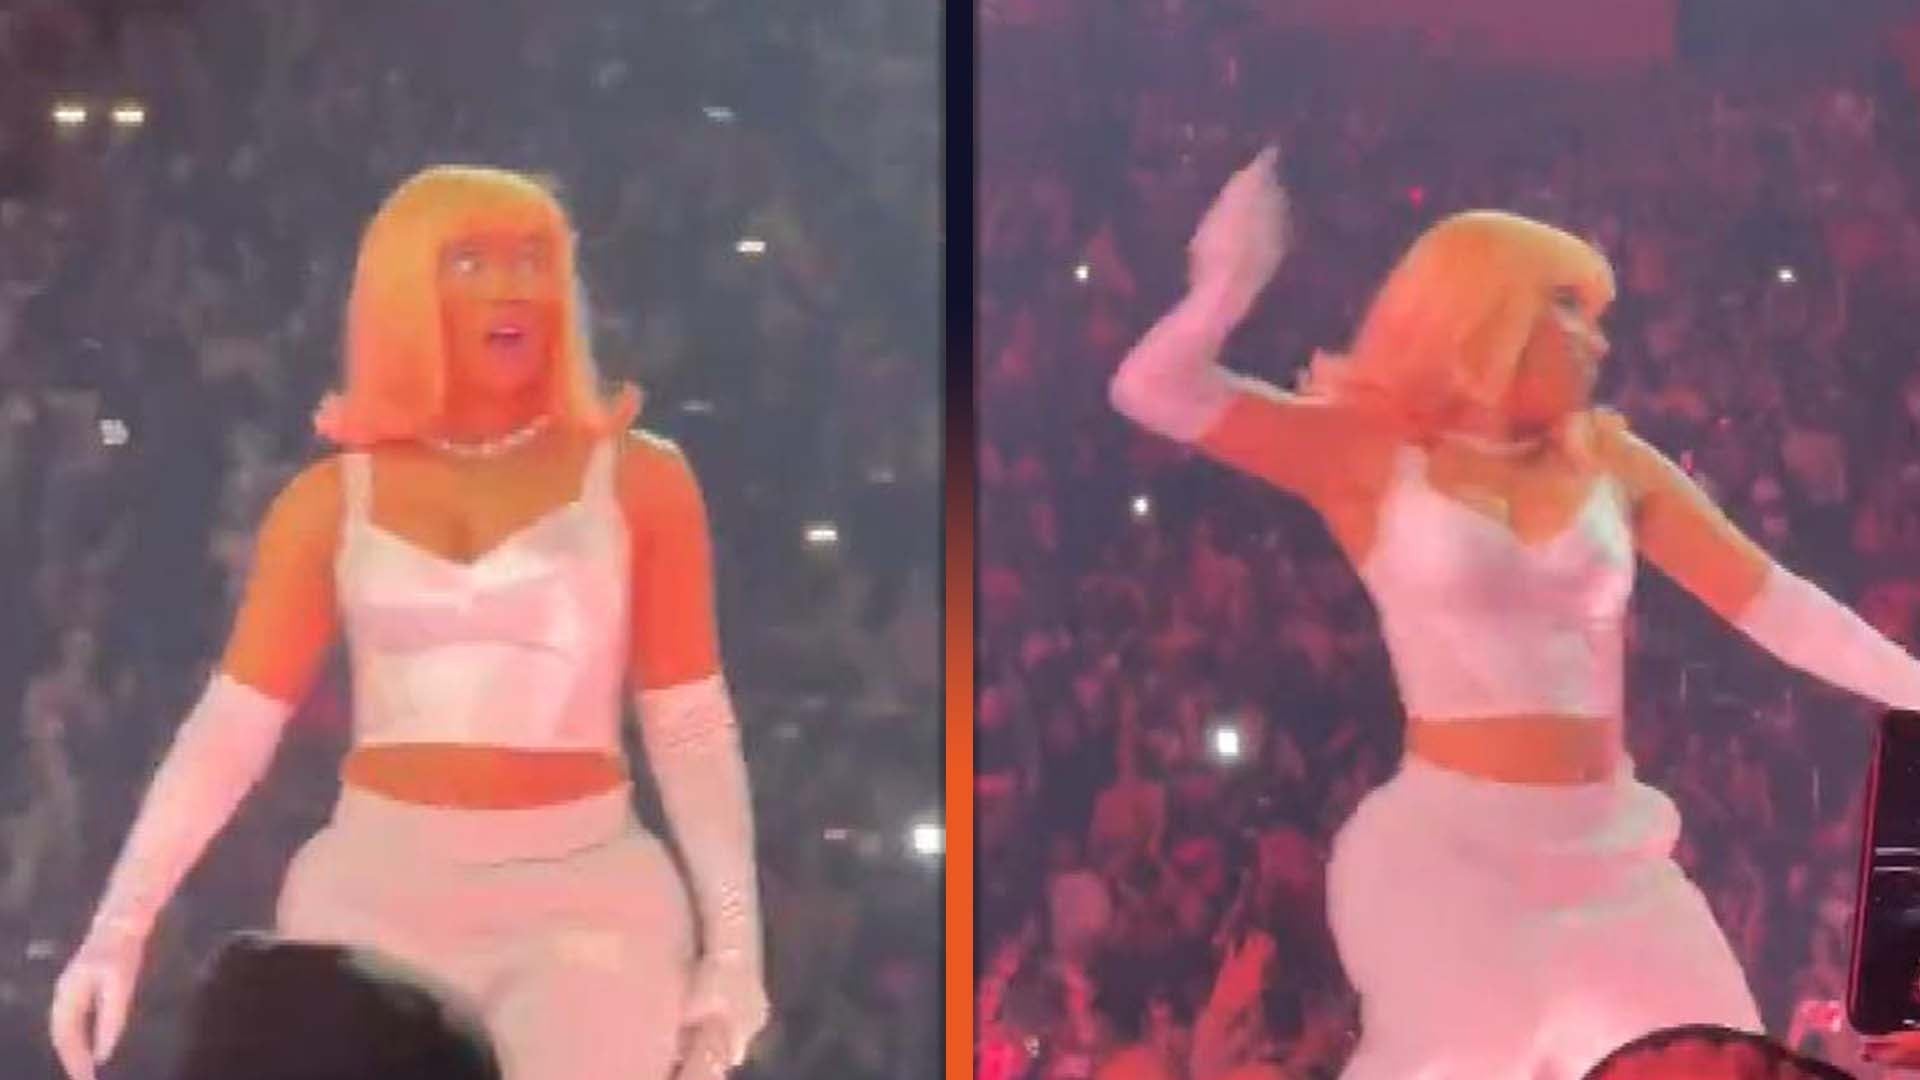 Watch Nicki Minaj throw an object back at fans who threw it at her during a concert